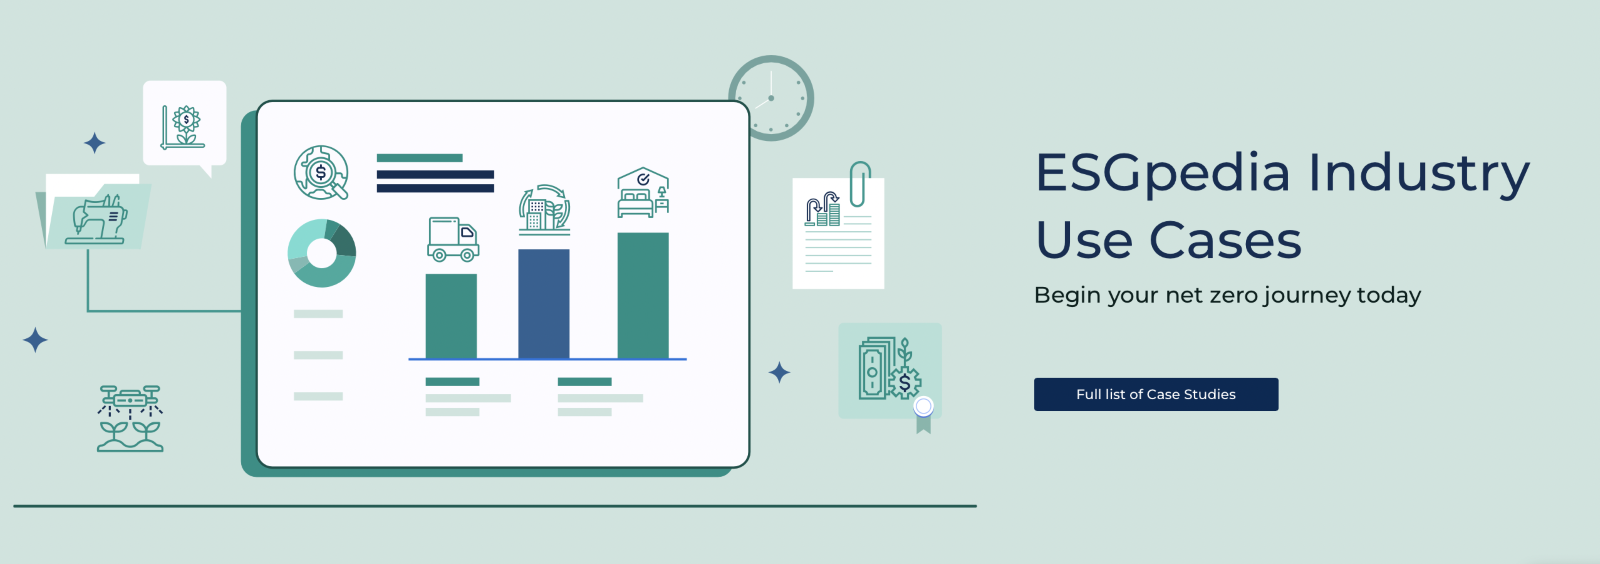 STACS ESGpedia Industry Use Case